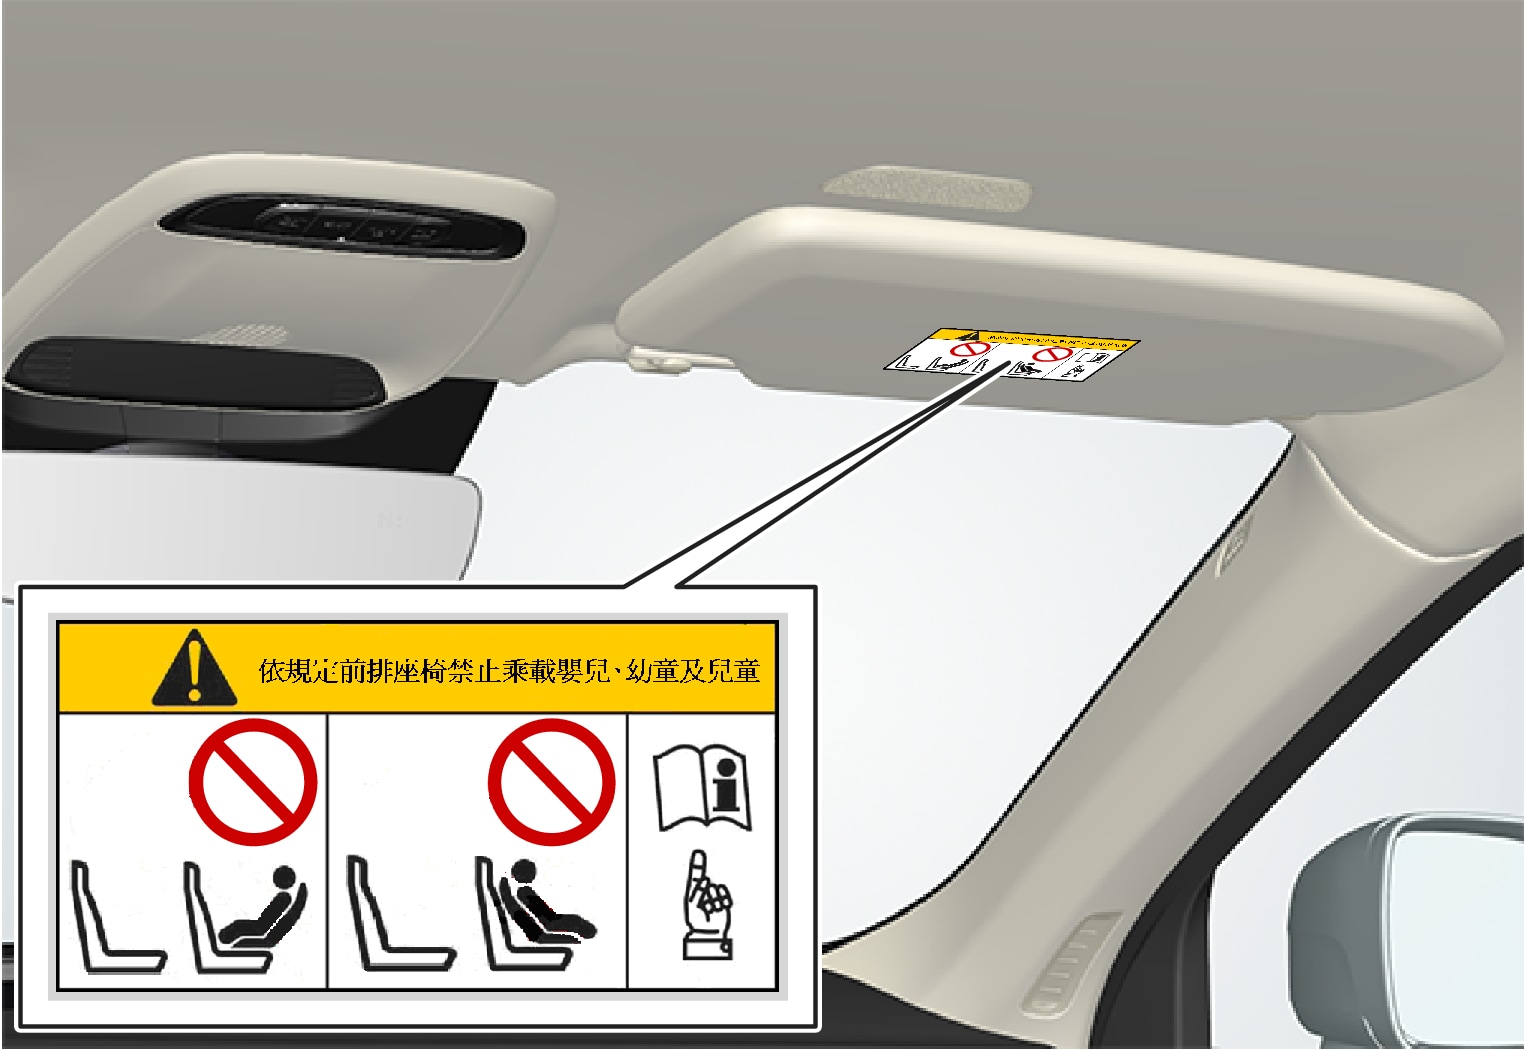 P5-1507–Safety–Child seat decal placement Taiwan